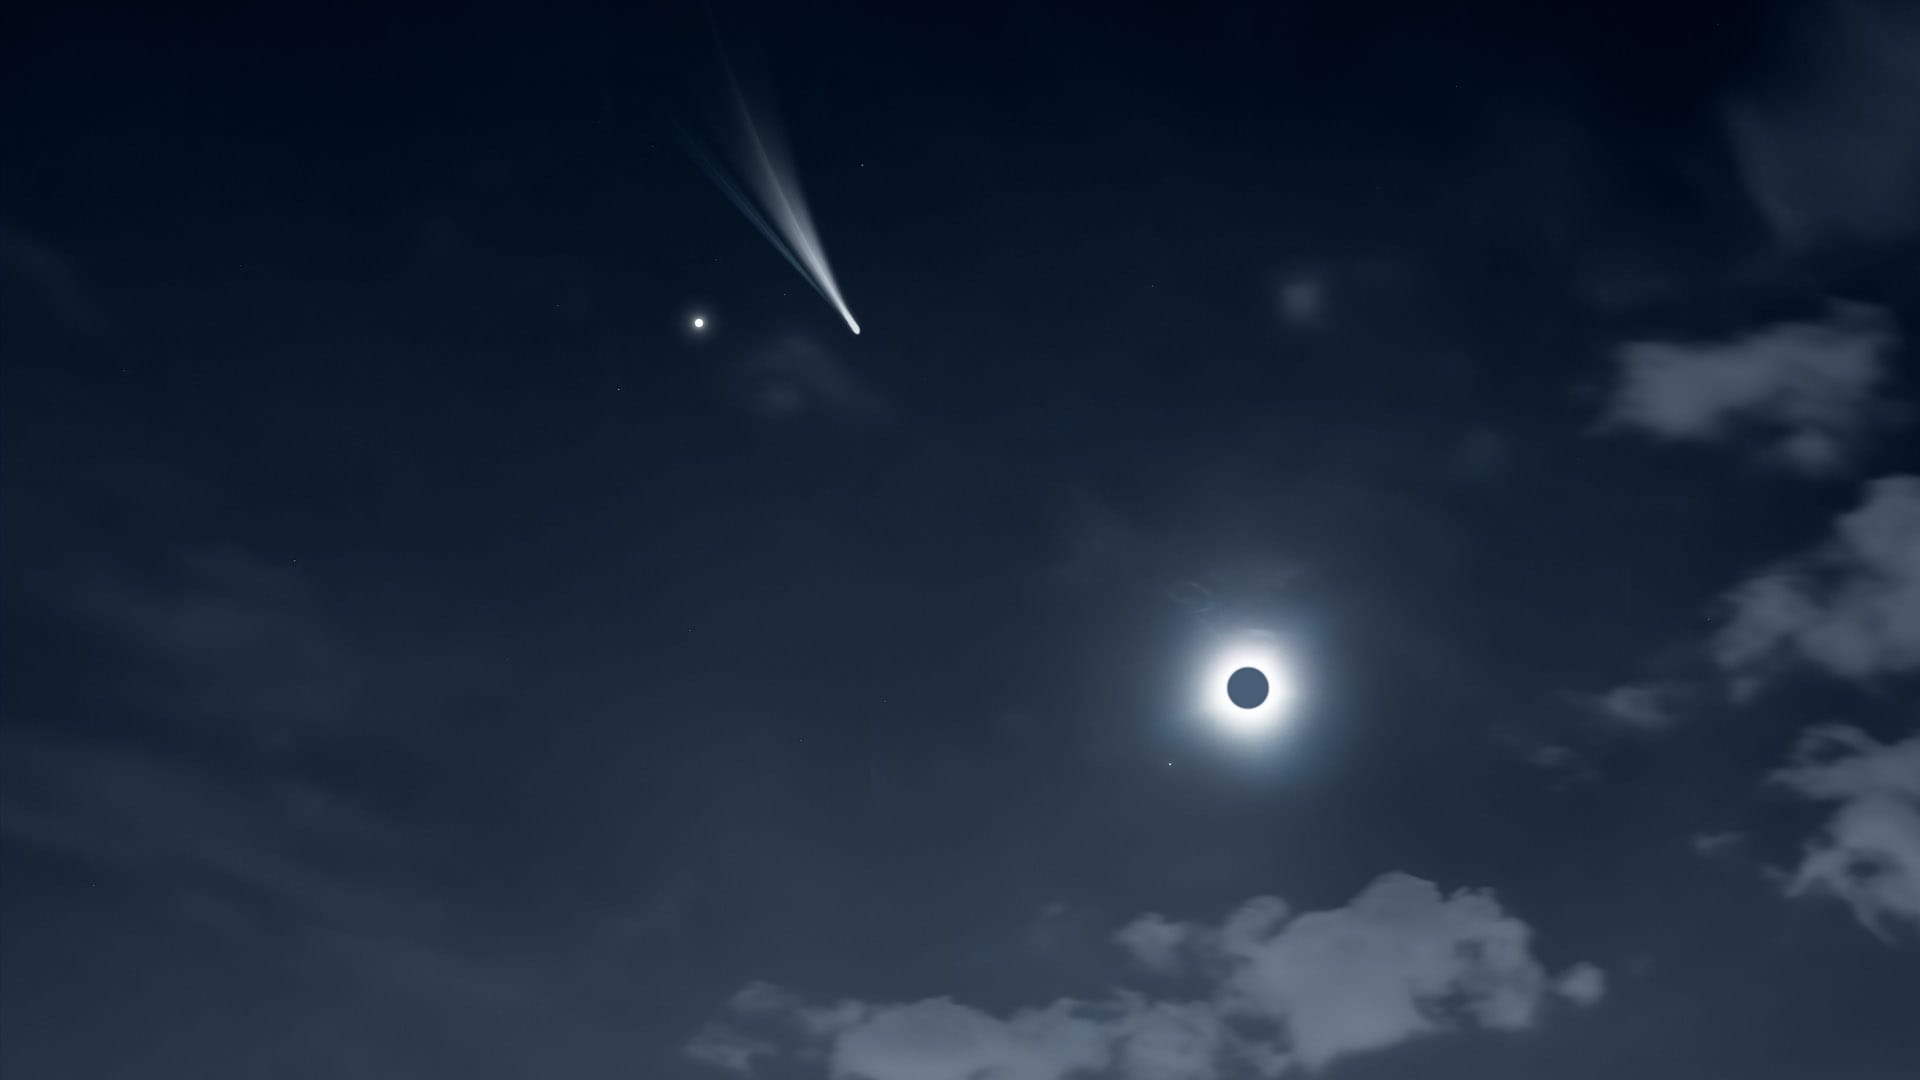 Appearance of the “Devil Comet” coincides with the solar eclipse on April 8